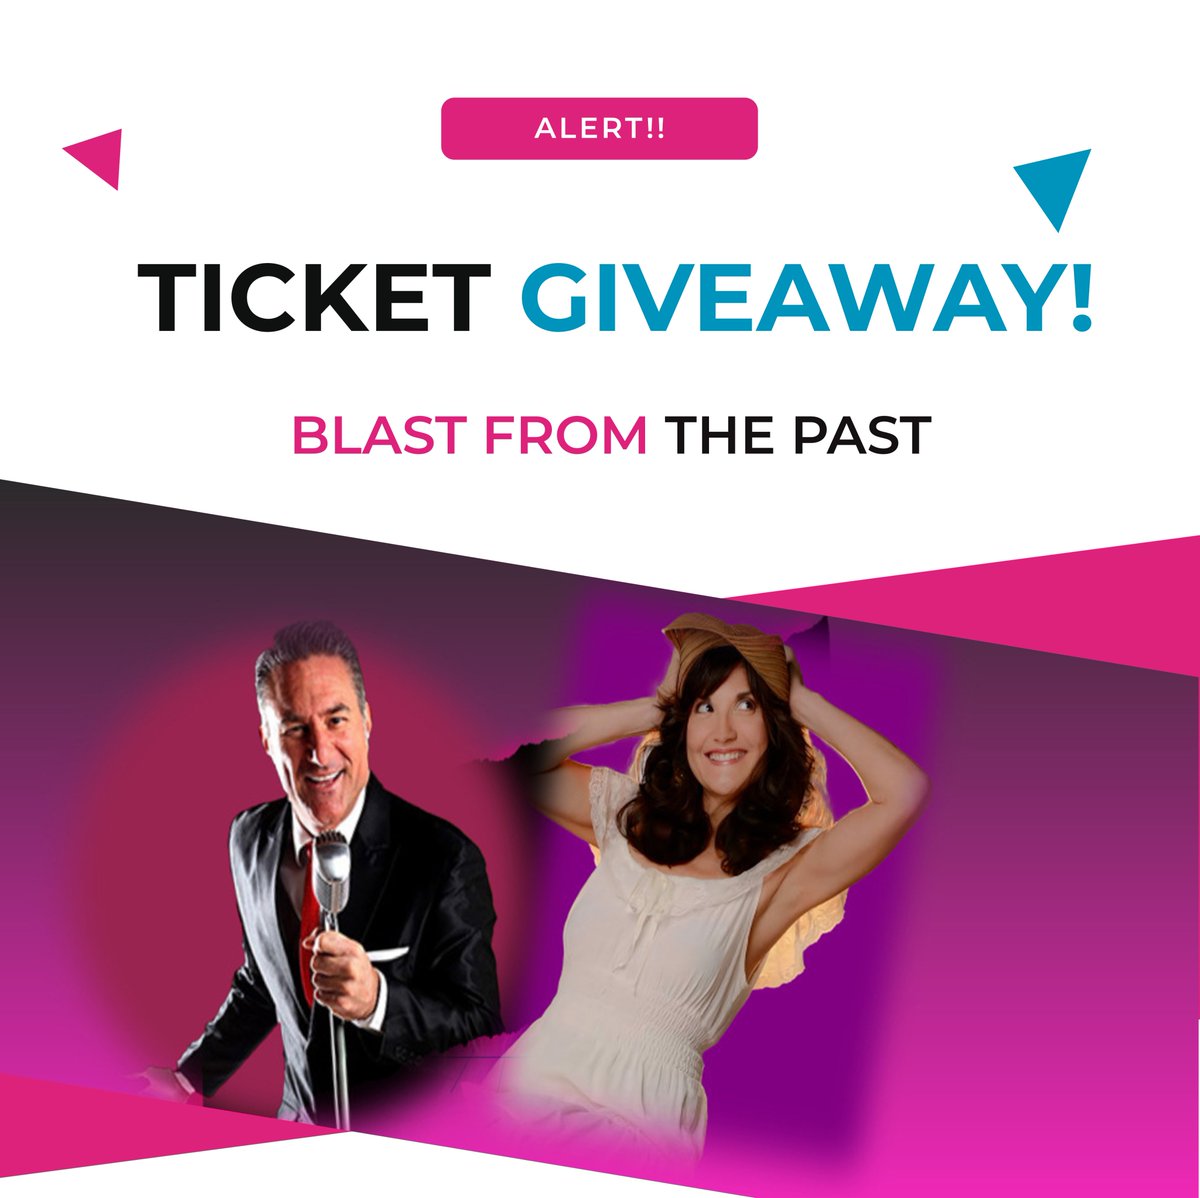 🌟 GIVEAWAY ALERT! 🌟

We're giving away TWO tickets to 'Blast from the Past'  April 21st at 7:30 PM!
To enter:
Follow our page.
Like this post.
Tag a friend in the comments who you'd love to take along  Hurry, the giveaway ends FRIDAY April 19 at 1PM MST 🎶✨

#BlastFromThePast